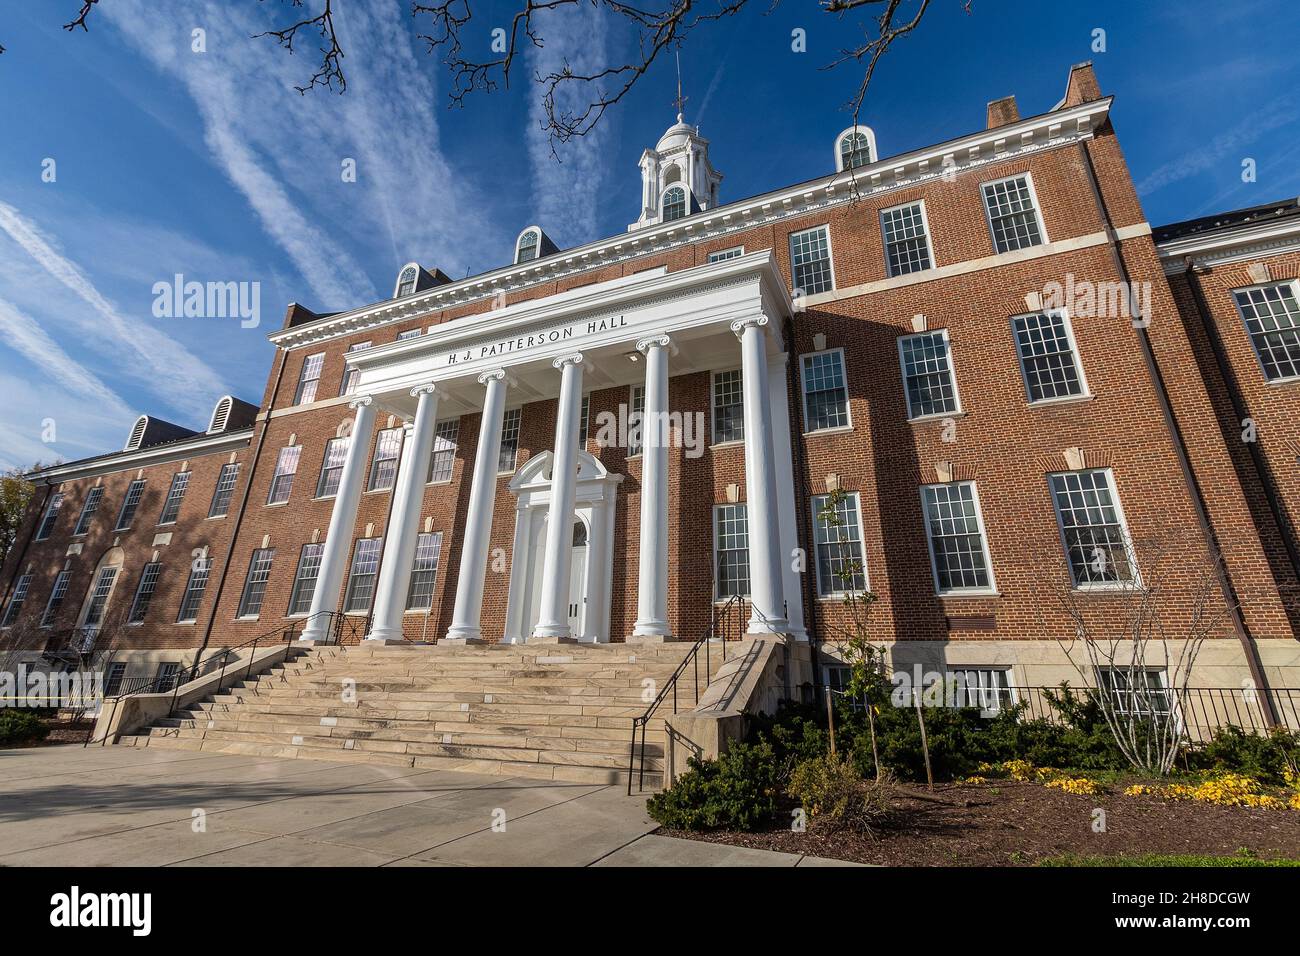 COLLEGE PARK, MD, USA - NOVEMBER 20: H.J. Patterson Hallon November 20, 2021 at the University of Maryland in College Park, Maryland. Stock Photo